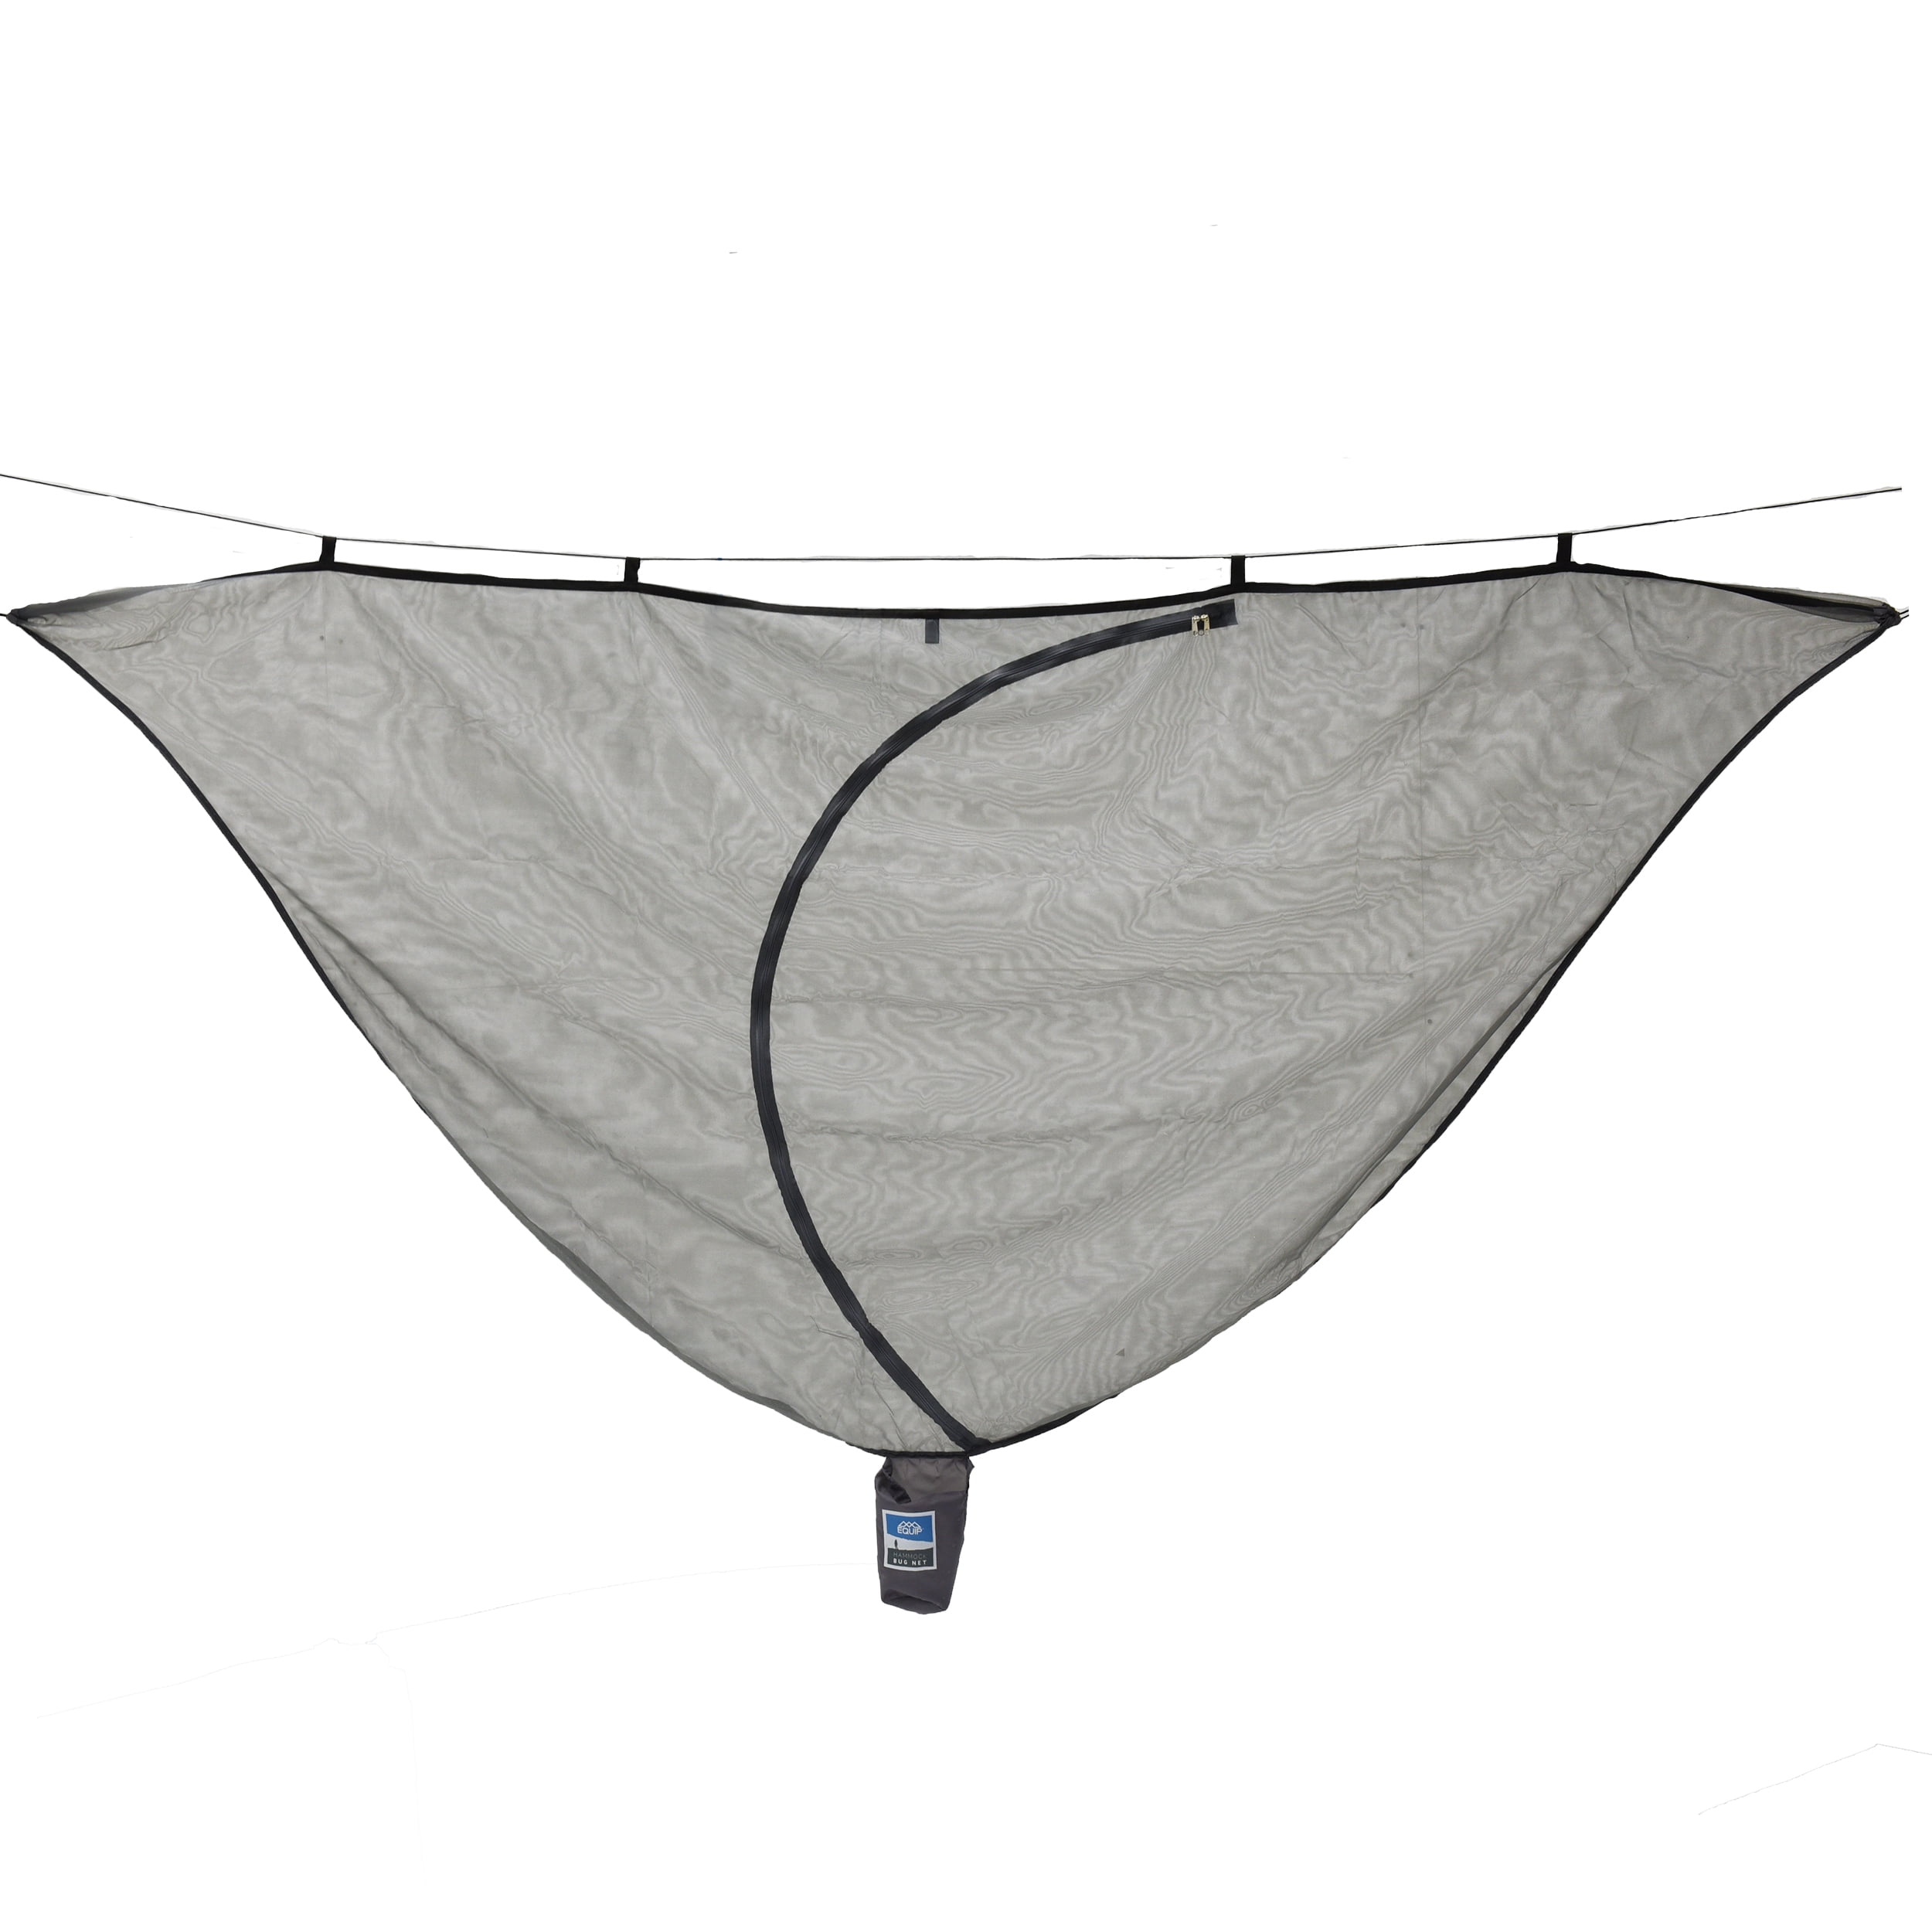 Equip Portable Hammock Bug Net, Gray Polyester Mosquito Net for Camping